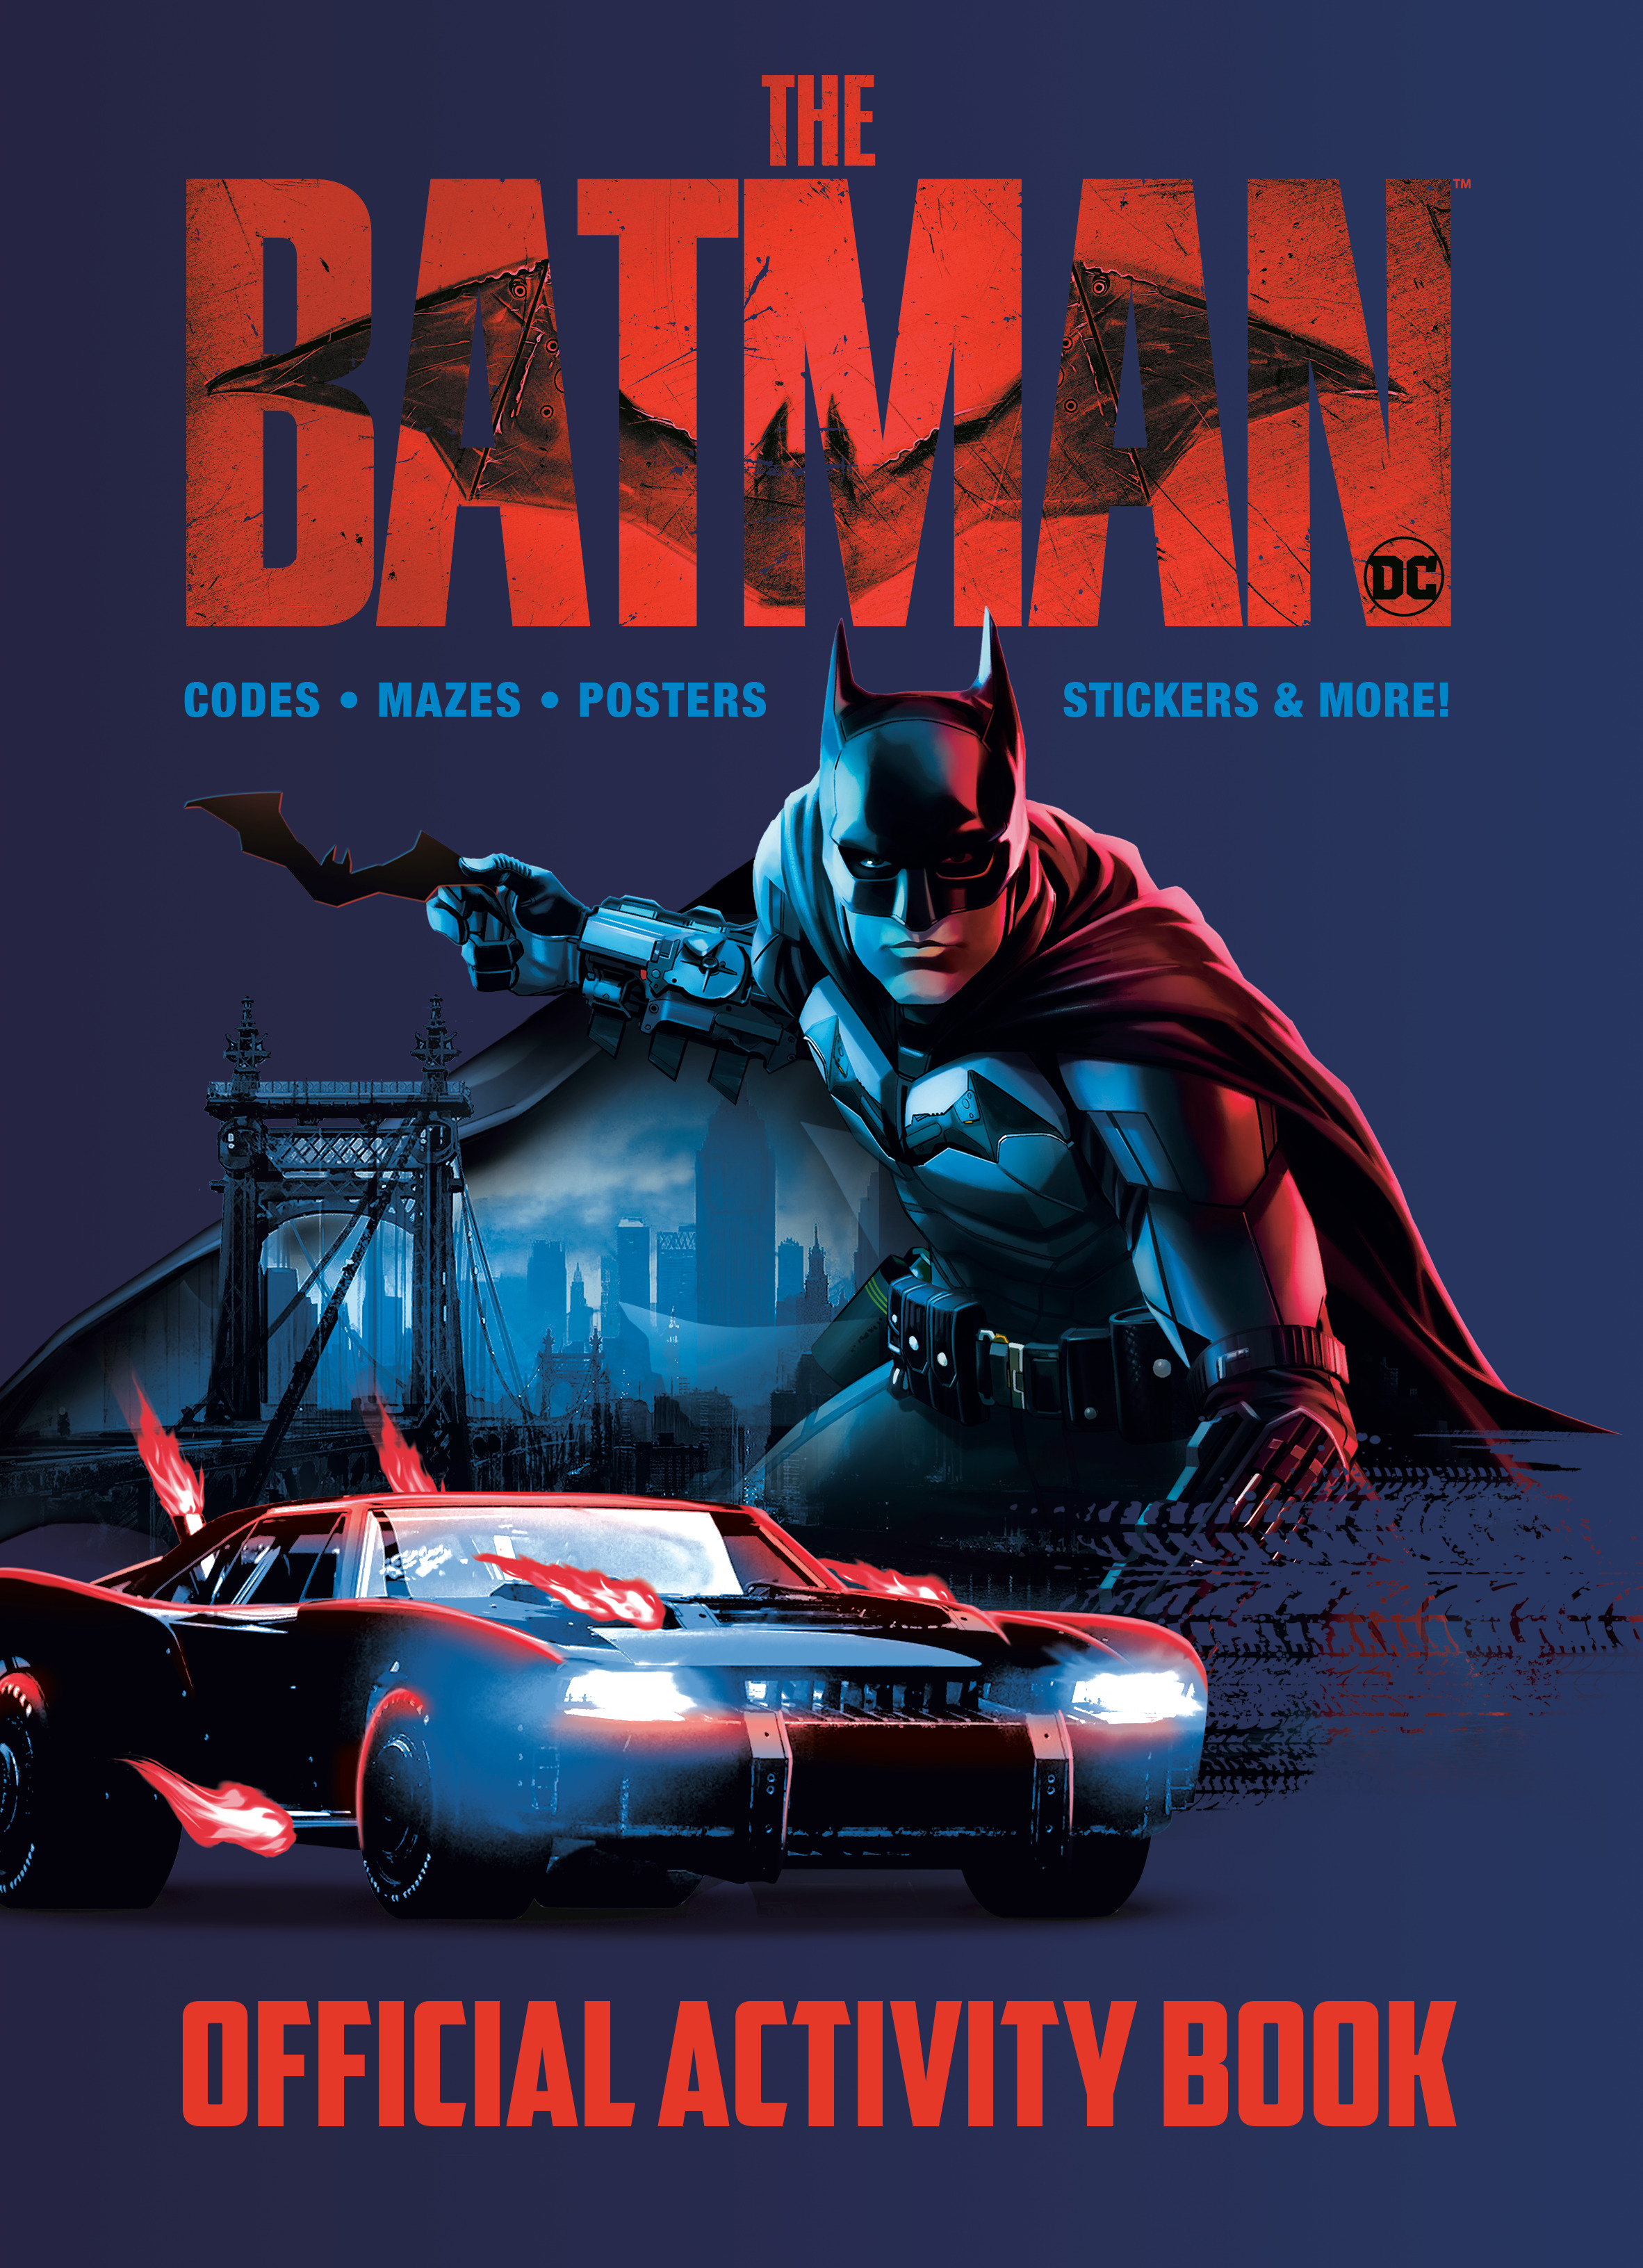 The Batman Official Activity Book (The Batman Movie) : Includes codes, maze, puzzles, and stickers! | 